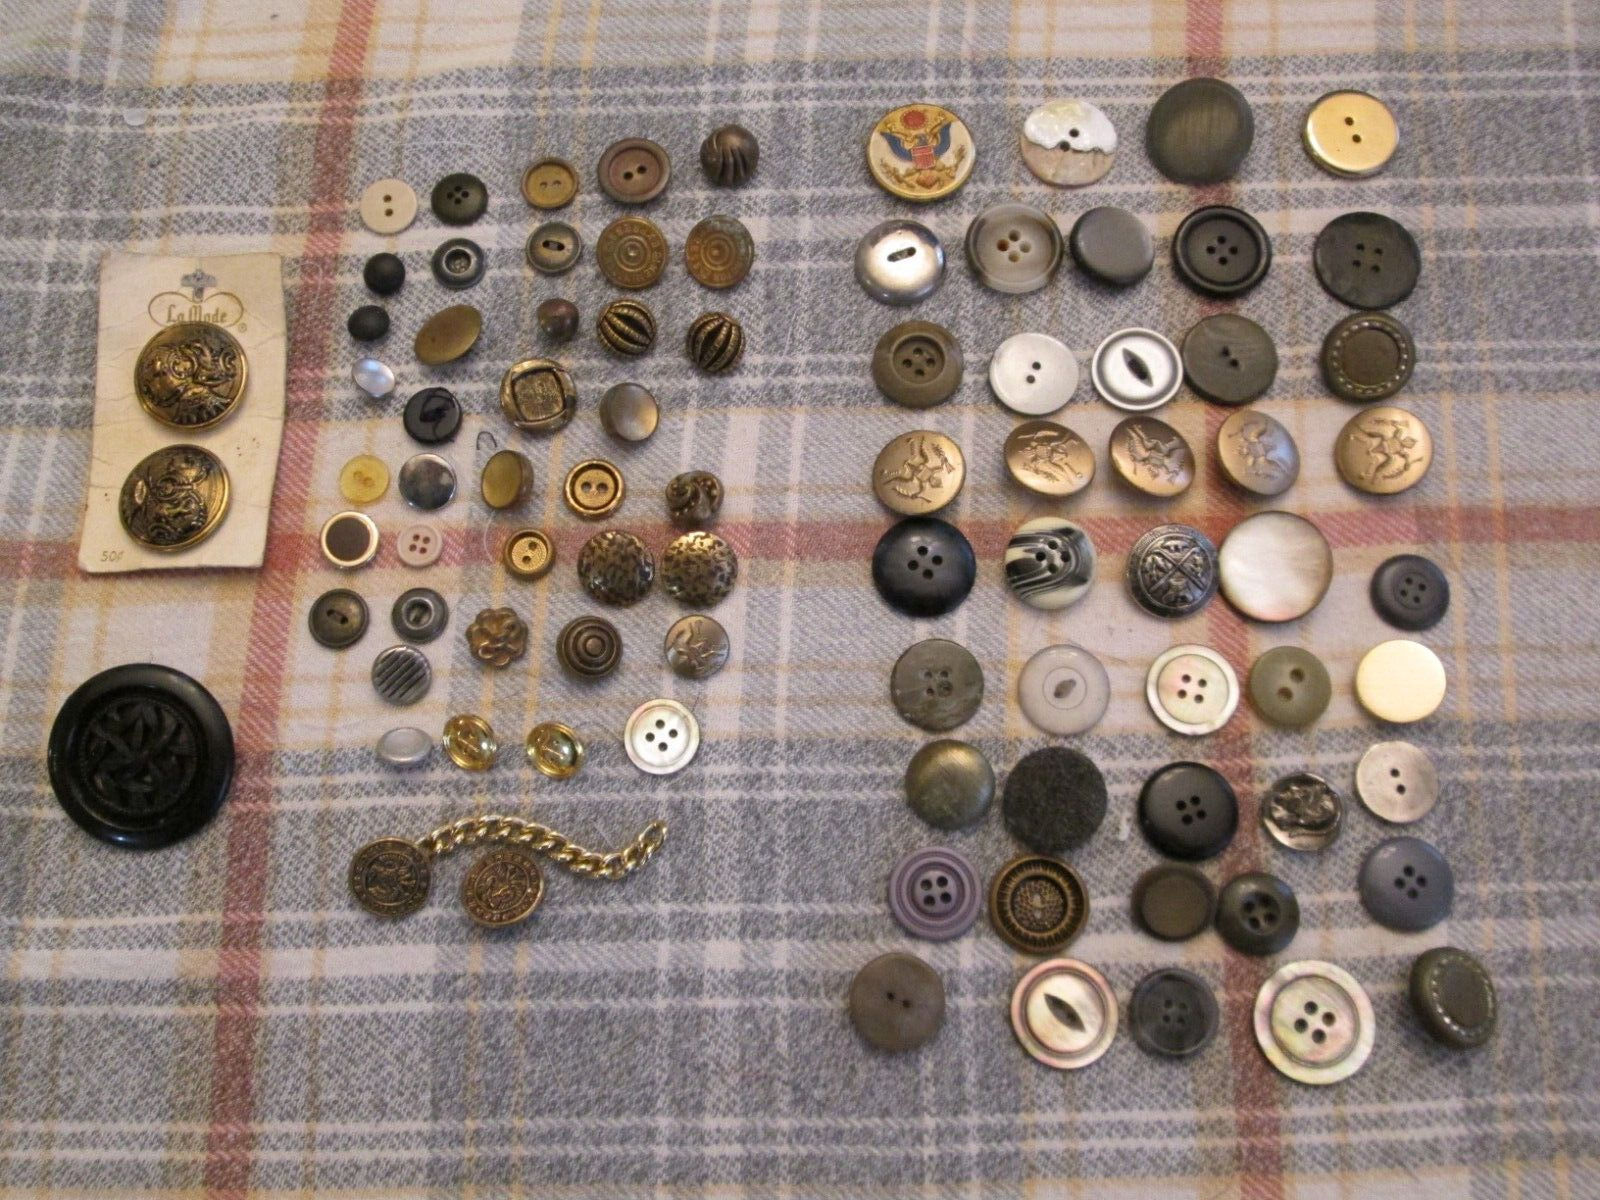 Lot of 88 old vintage buttons, military, brass, La Mode.